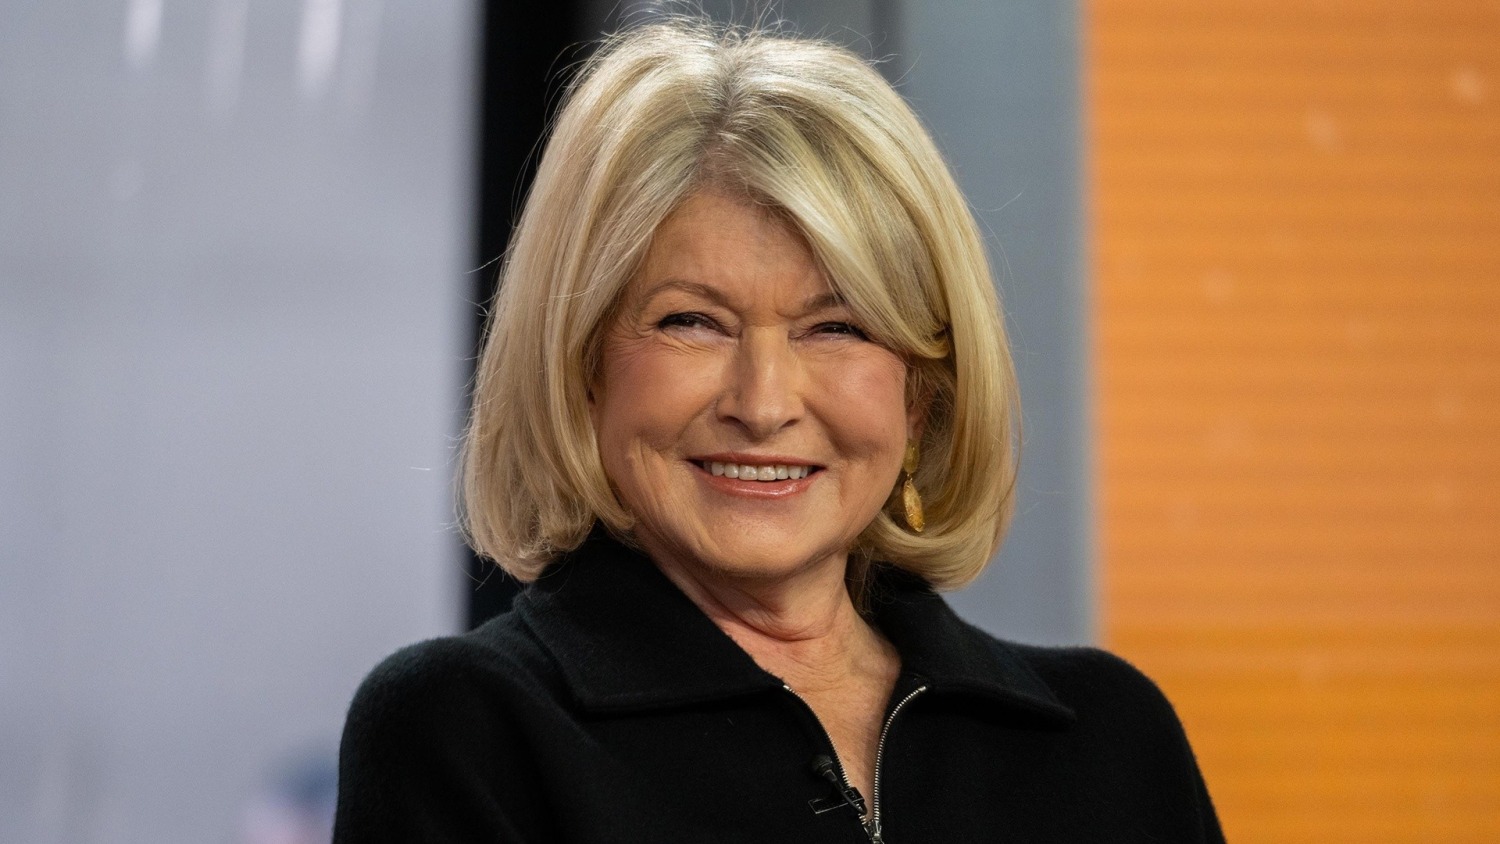 Martha Stewart shows off skin in close-up selfies with 'absolutely